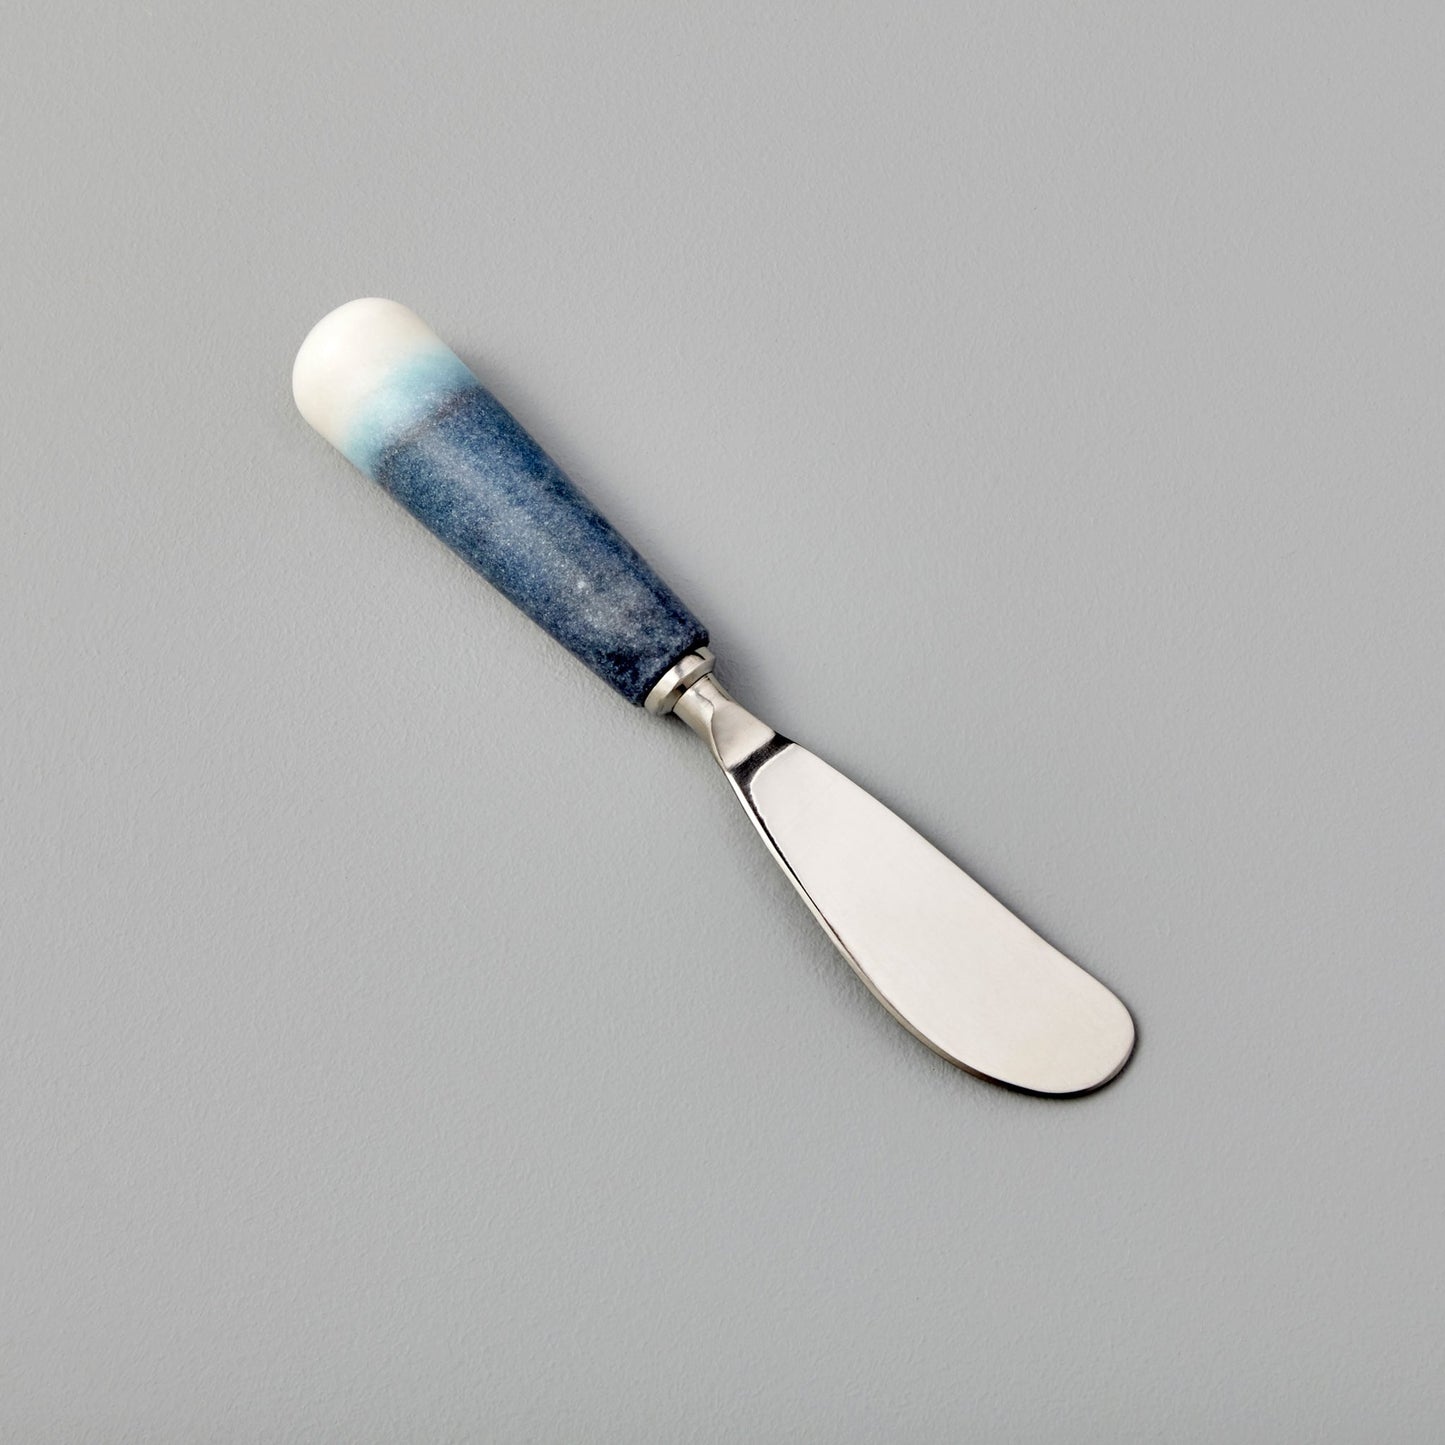 Be Home White Marble with Blue Dip Spreader